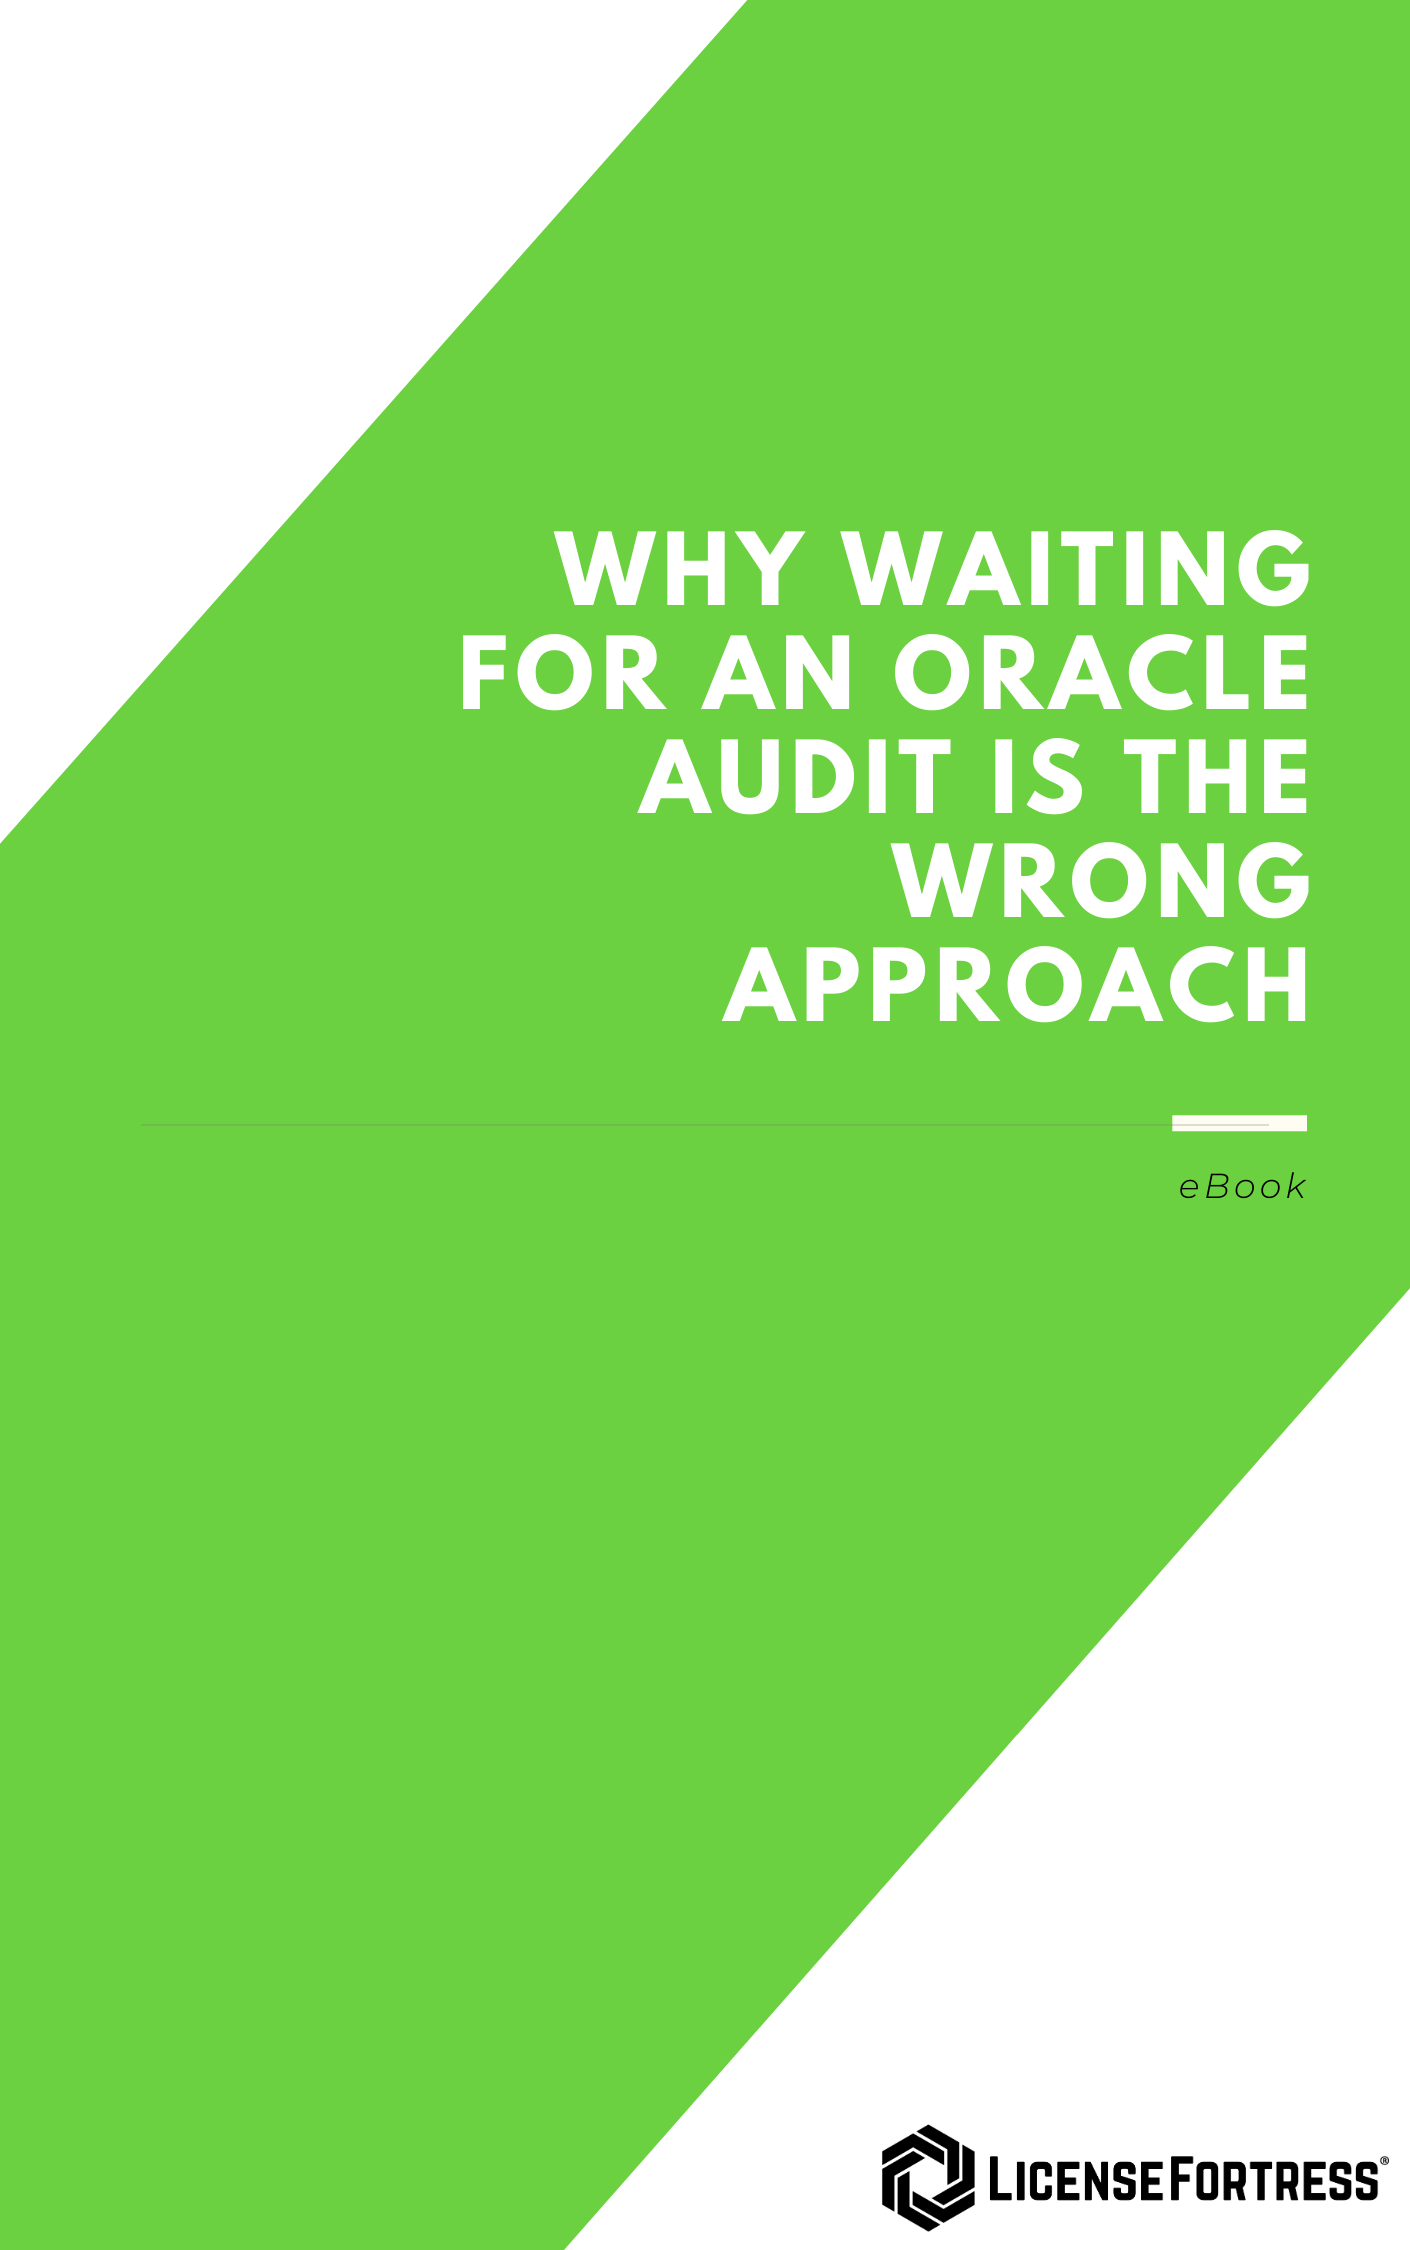 Why Waiting is the Wrong Approach